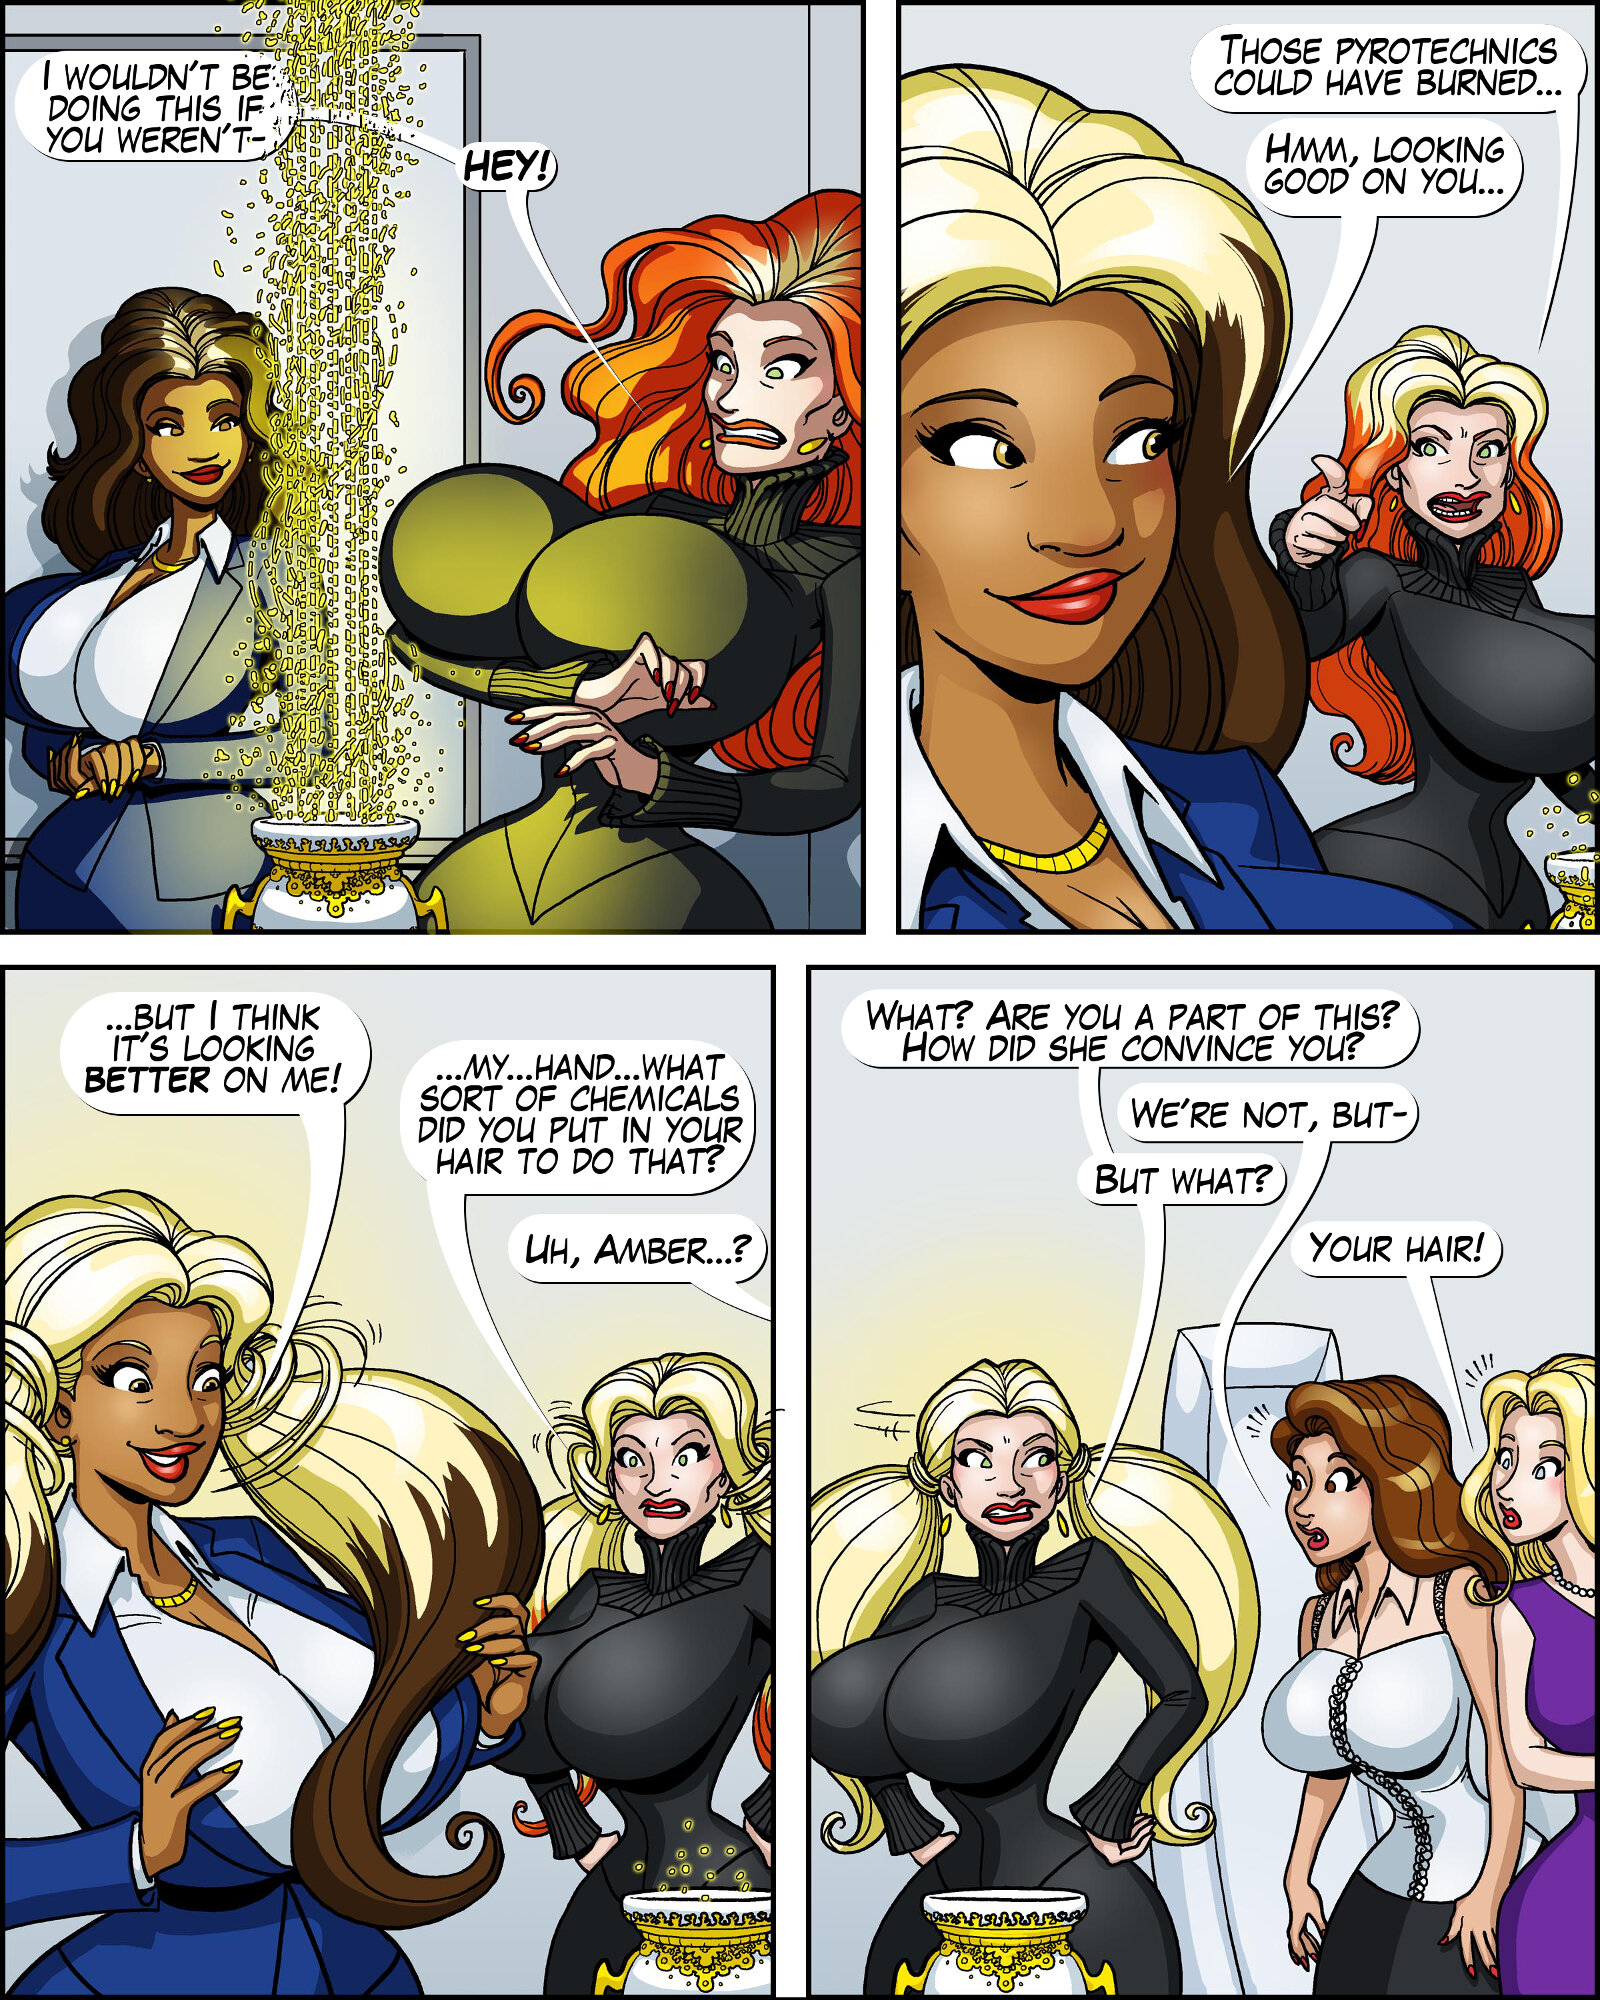 carl ealy add photo sexy breast expansion comics